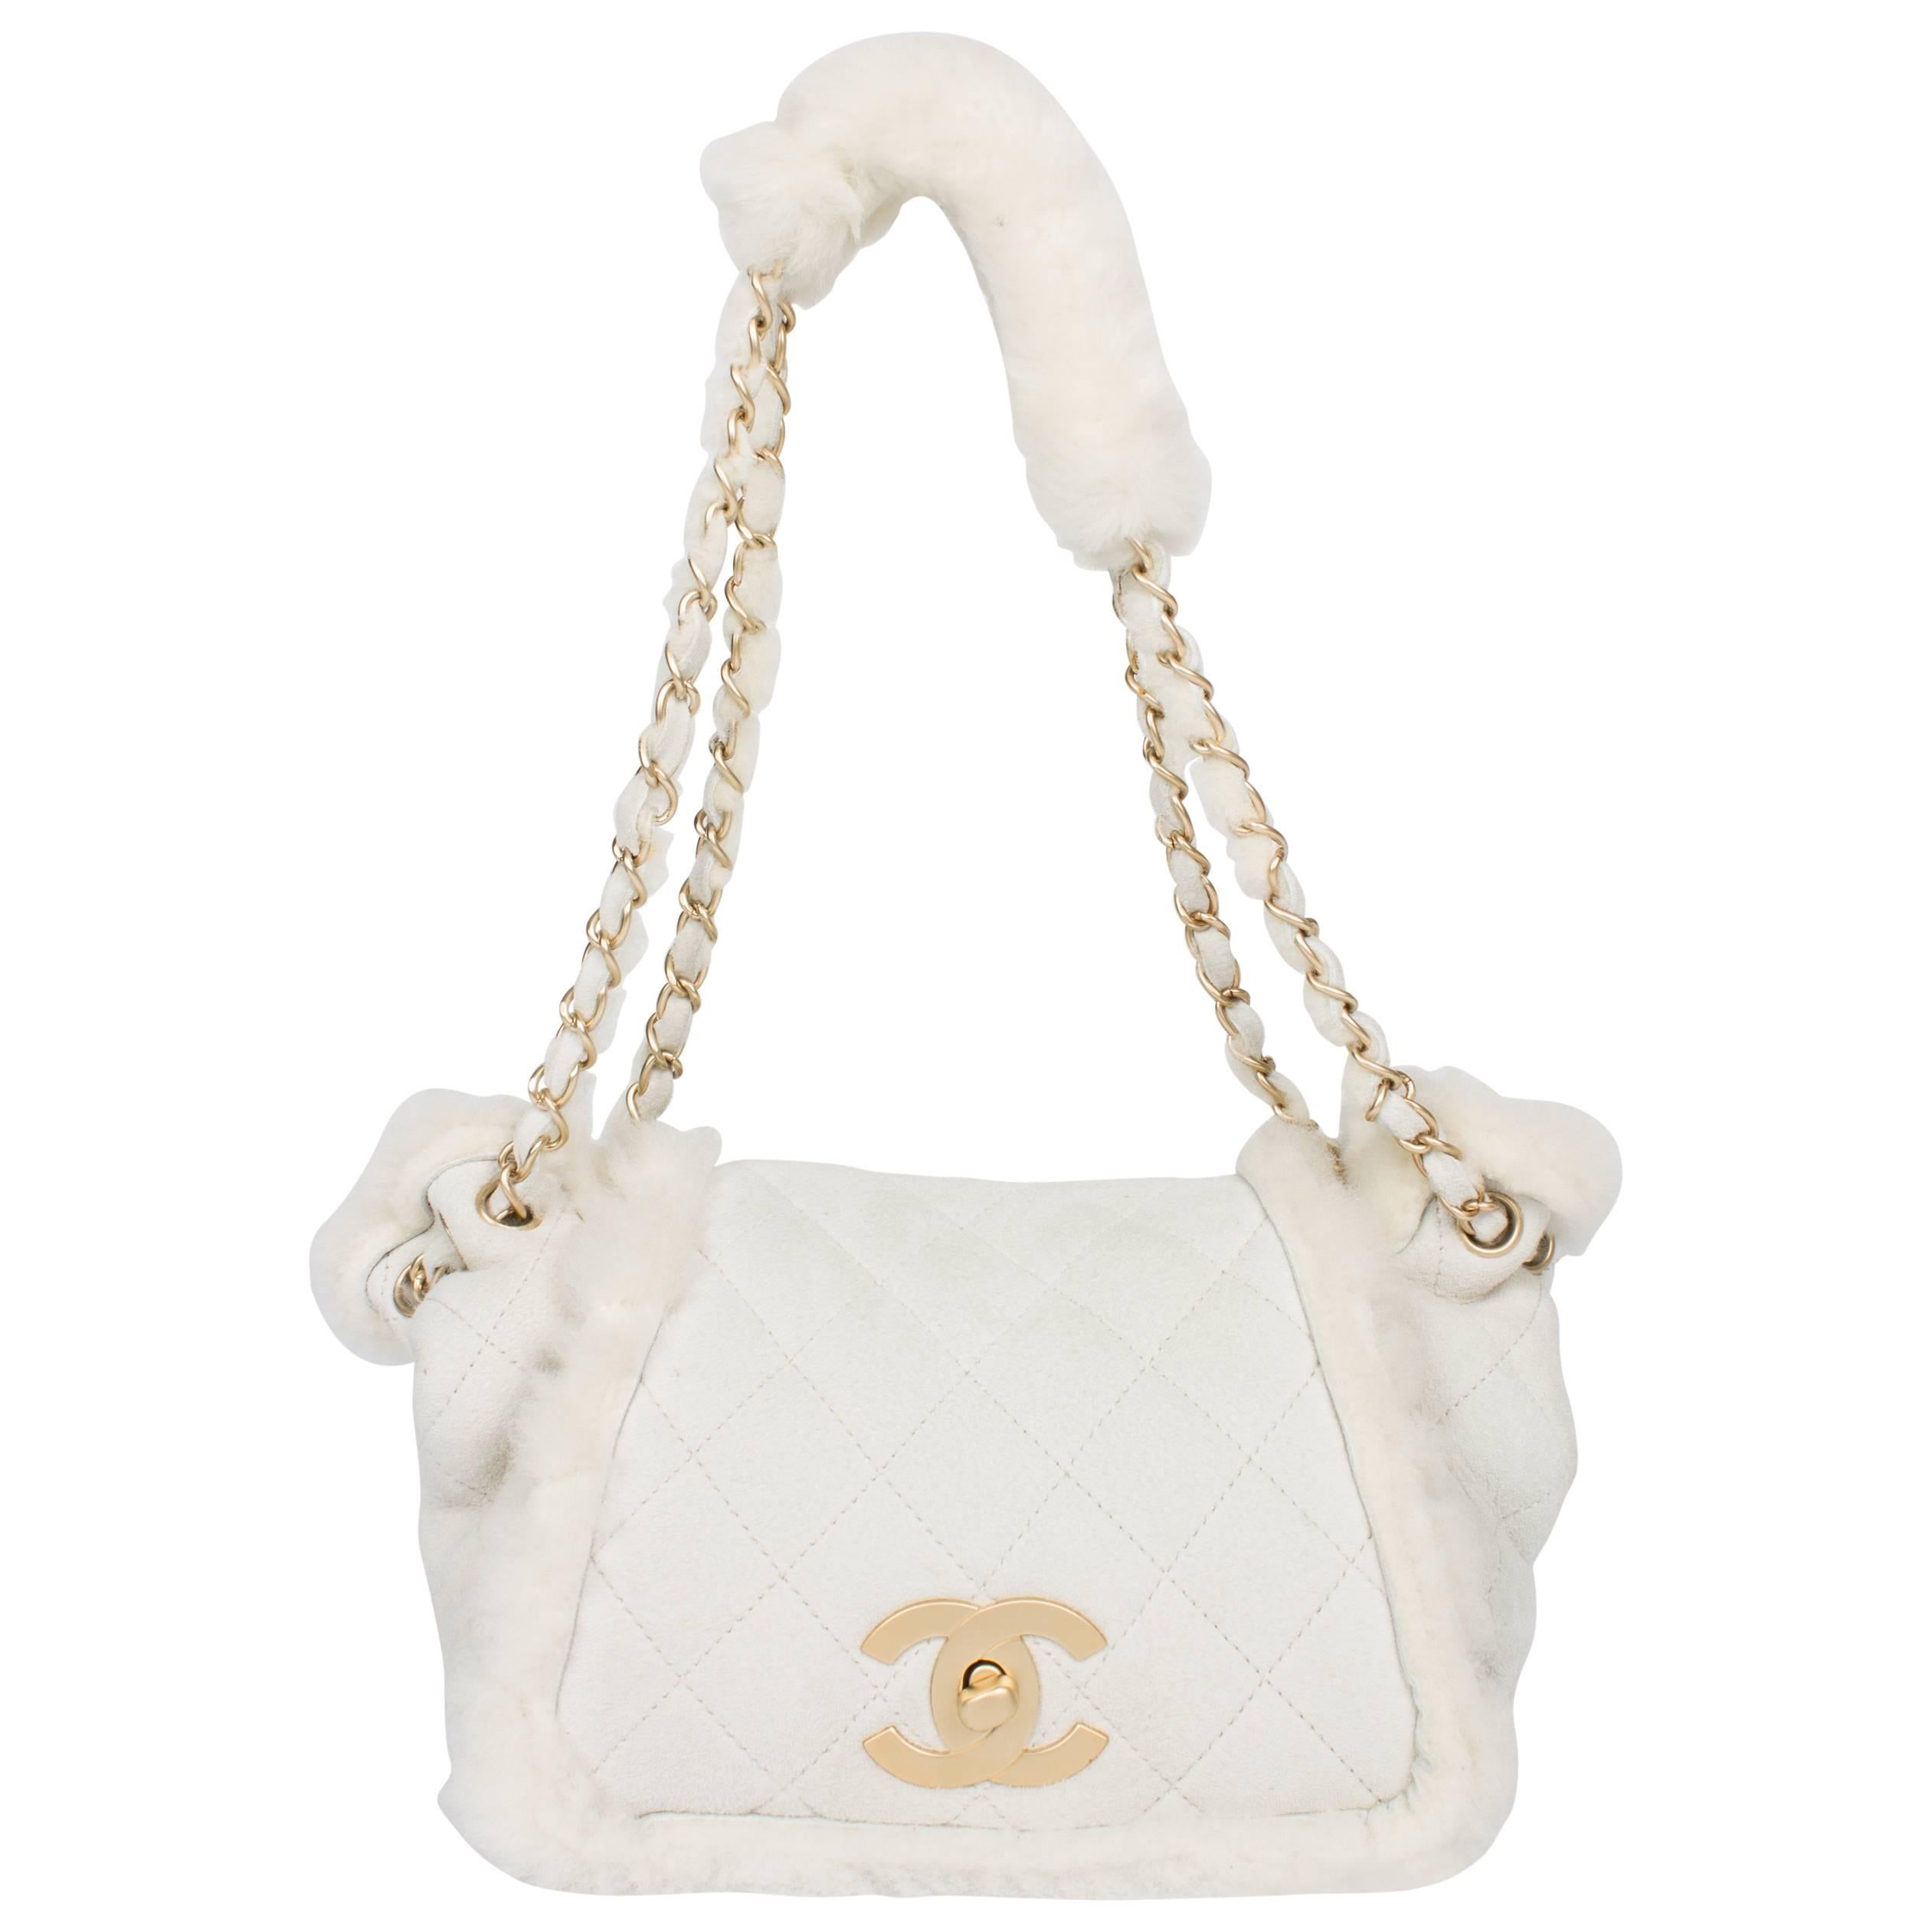 Chanel Leather & Shearling Quilted Bag - off-white